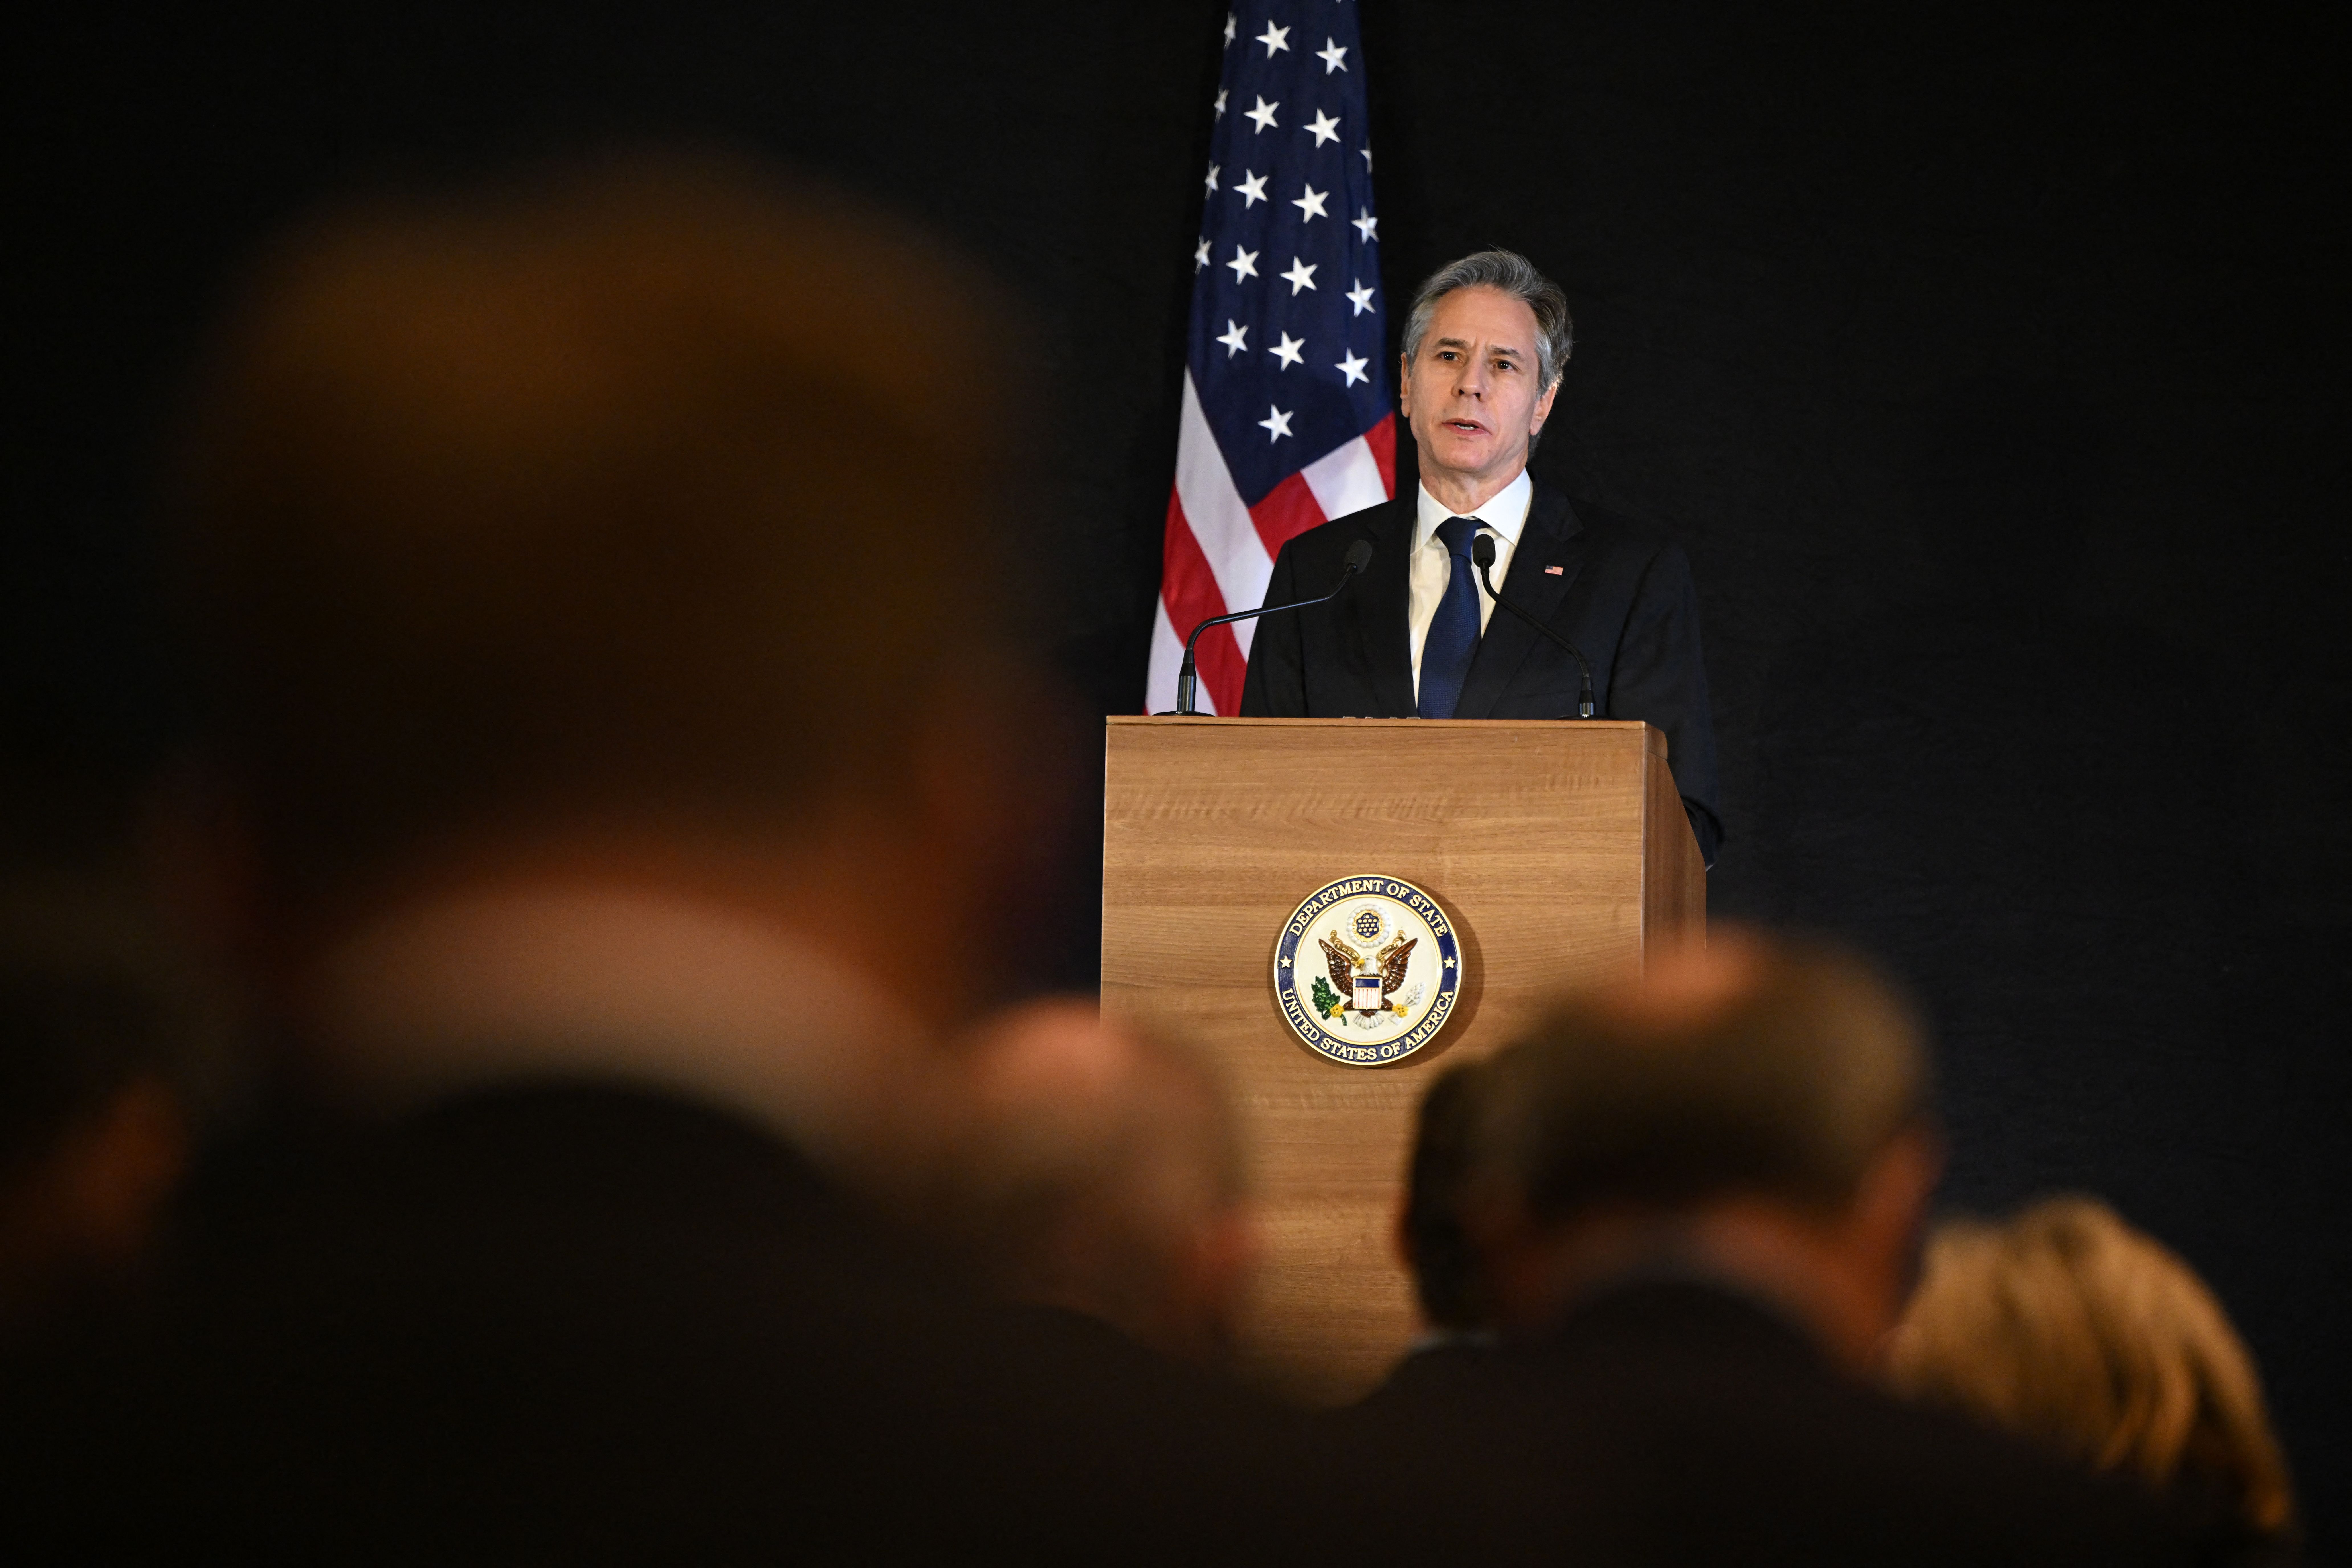 US Secretary of State Antony Blinken gives a press conference in Geneva, Switzerland, on January 21, after meeting Russian Foreign Minister Sergei Lavrov.